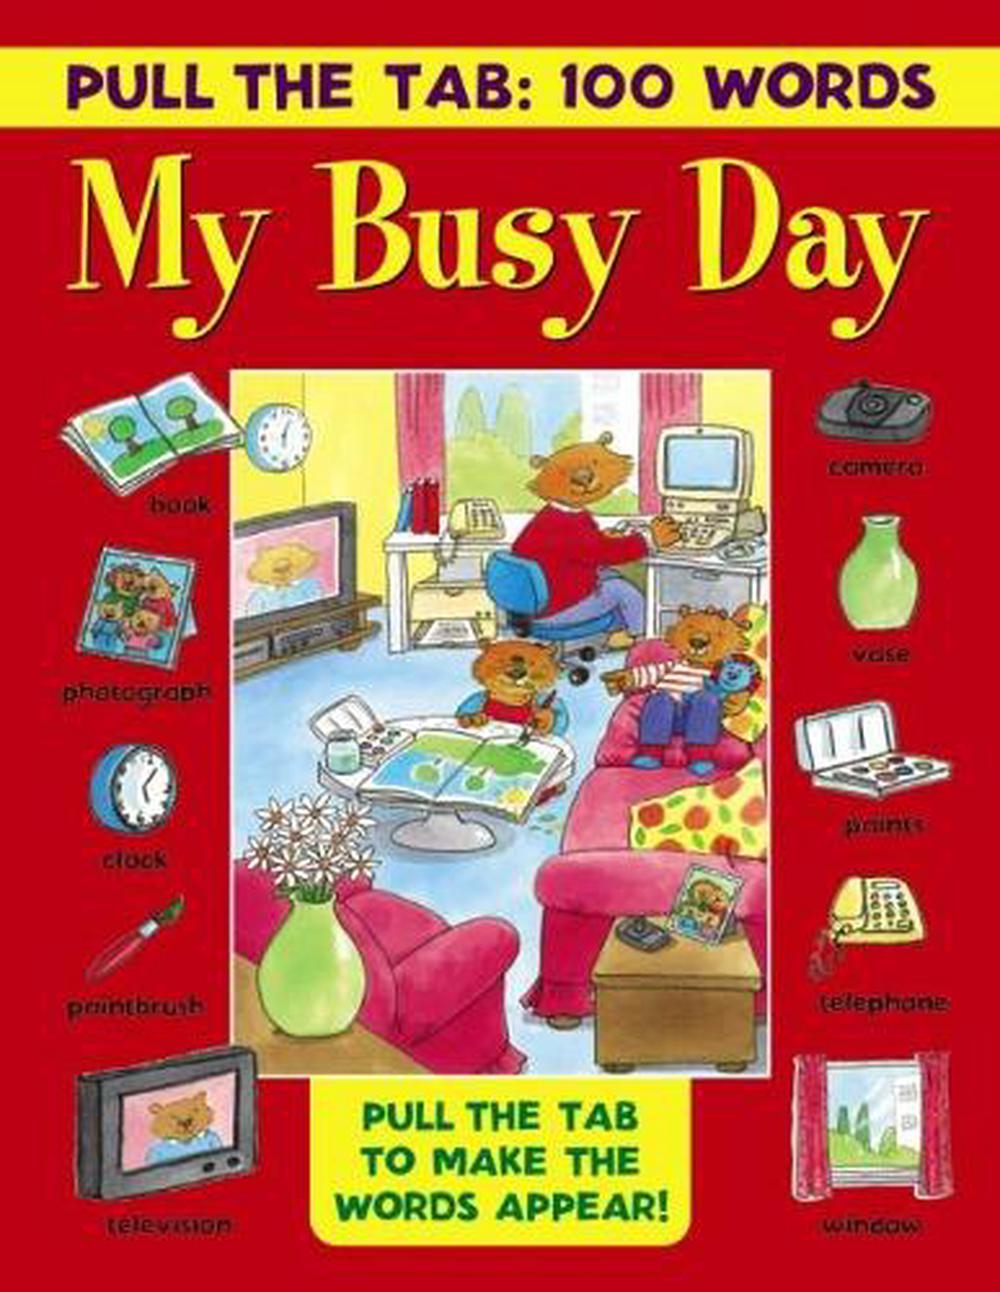 by　My　9781861477231　Busy　Hardcover,　at　Tab:　the　Pull　Nile　Day　Words　Lewis,　100　online　The　Jan　Buy